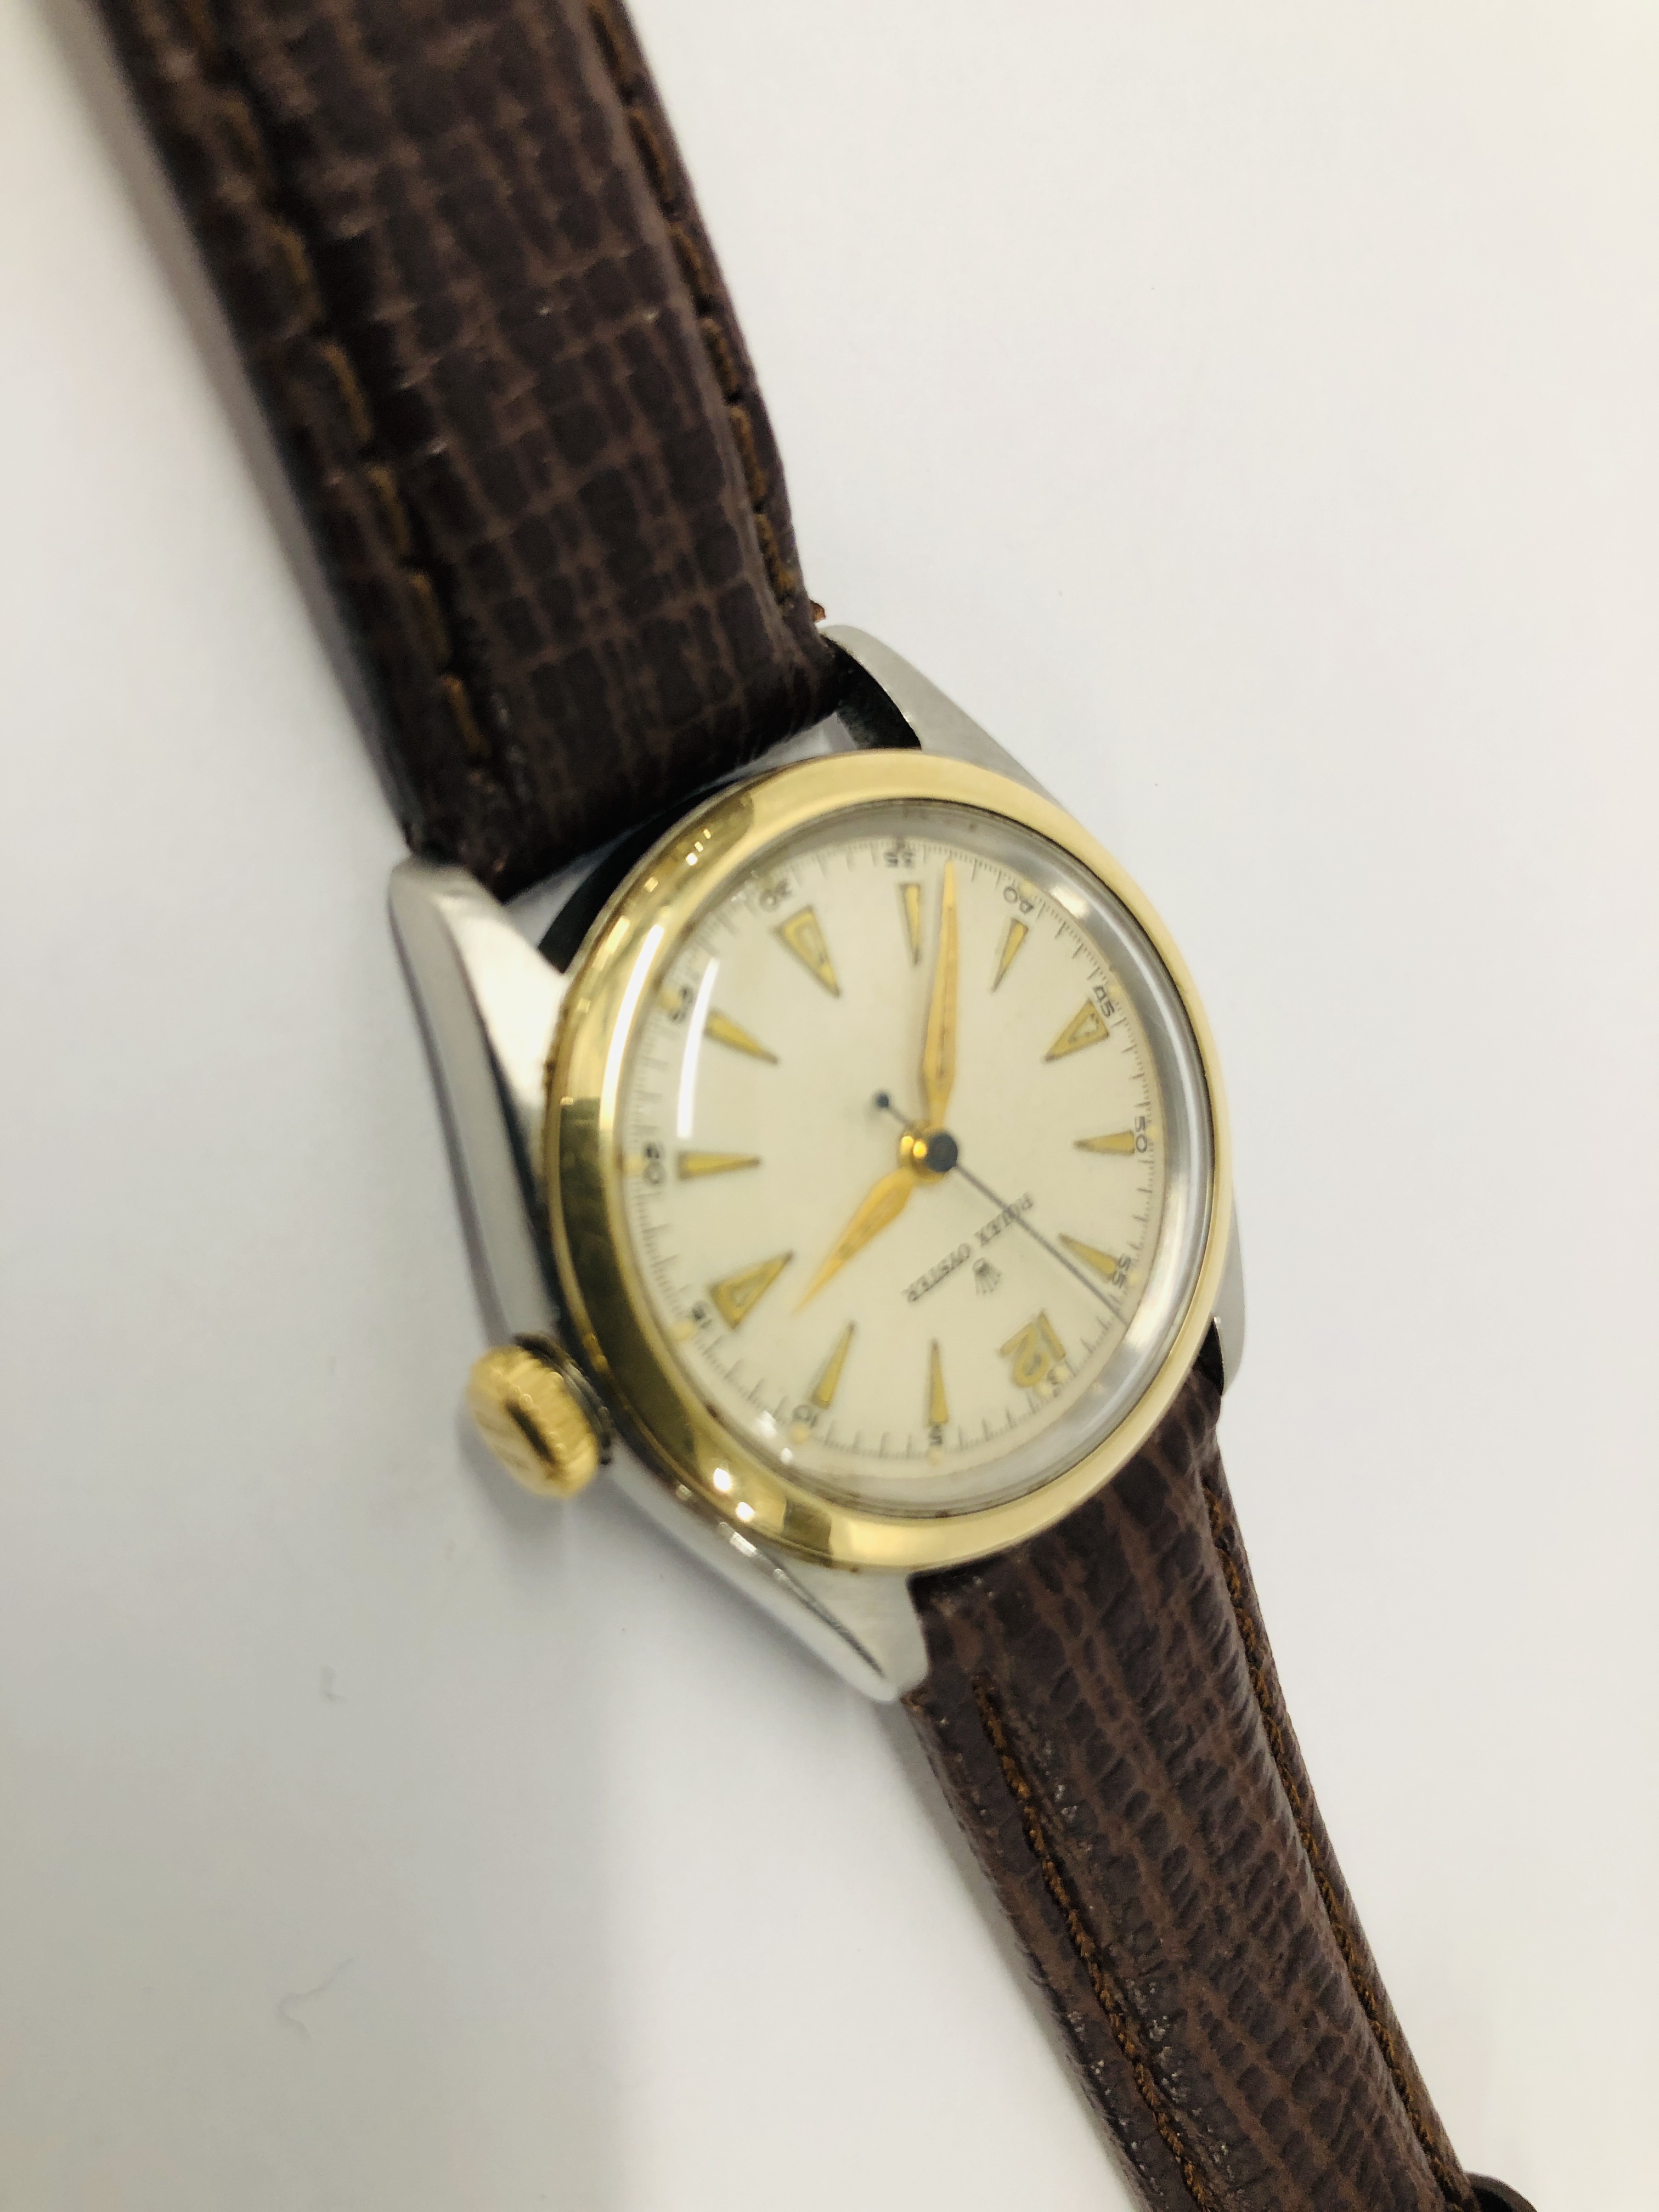 A VINTAGE CIRCA 1950 GENTLEMANS ROLEX OYSTER WRIST WATCH ON BROWN LEATHER REPLACEMENT STRAP. - Image 5 of 10